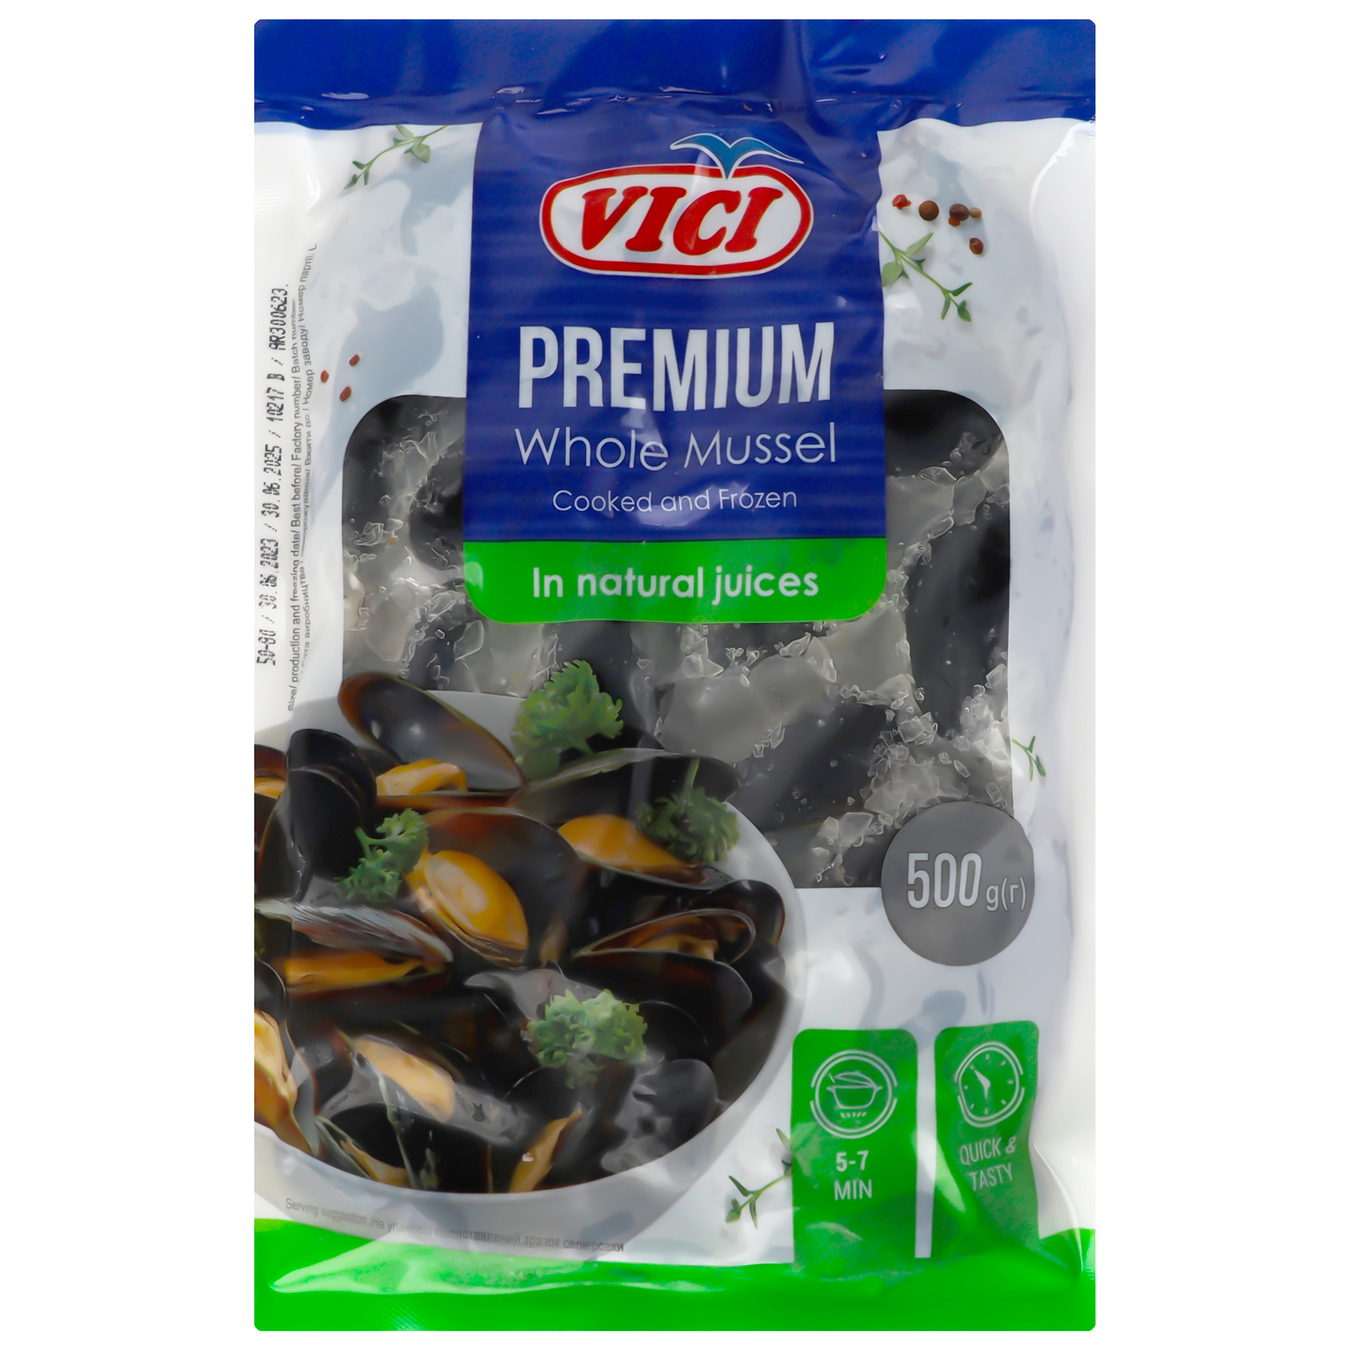 Vici mussels Prioritize in the shells in their own juice 500g